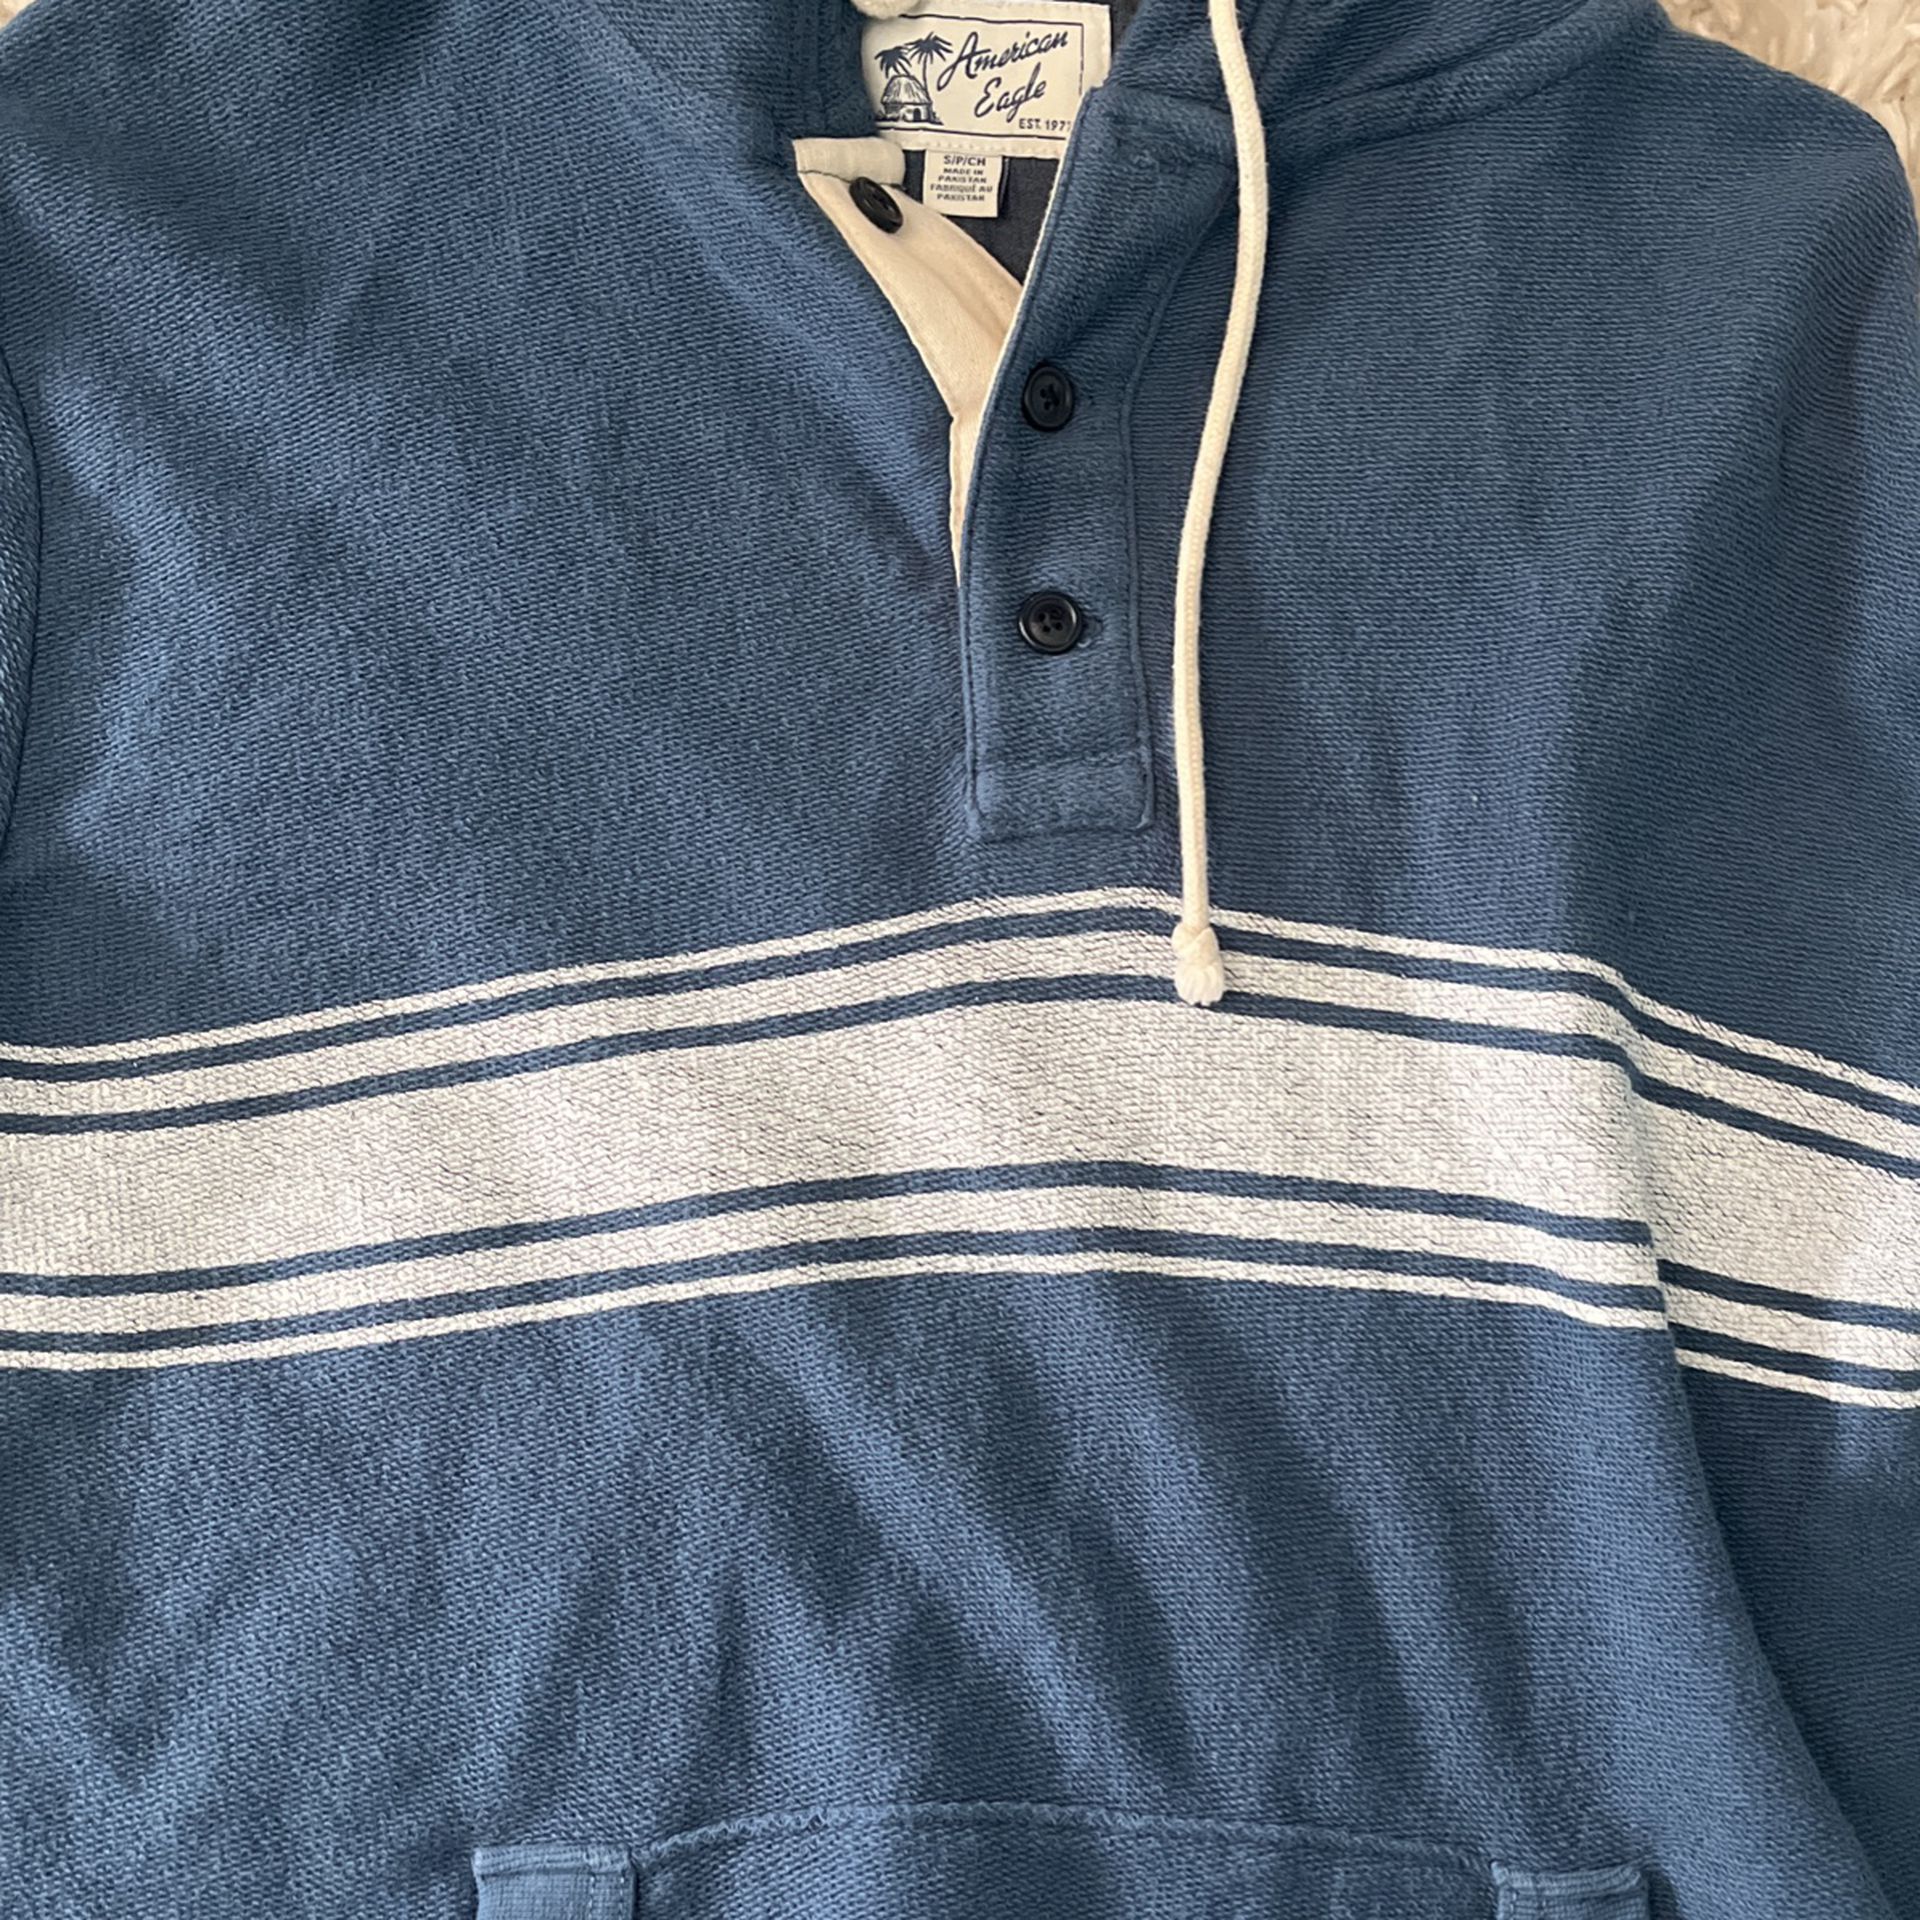 Blue and White American Eagle Hoodie